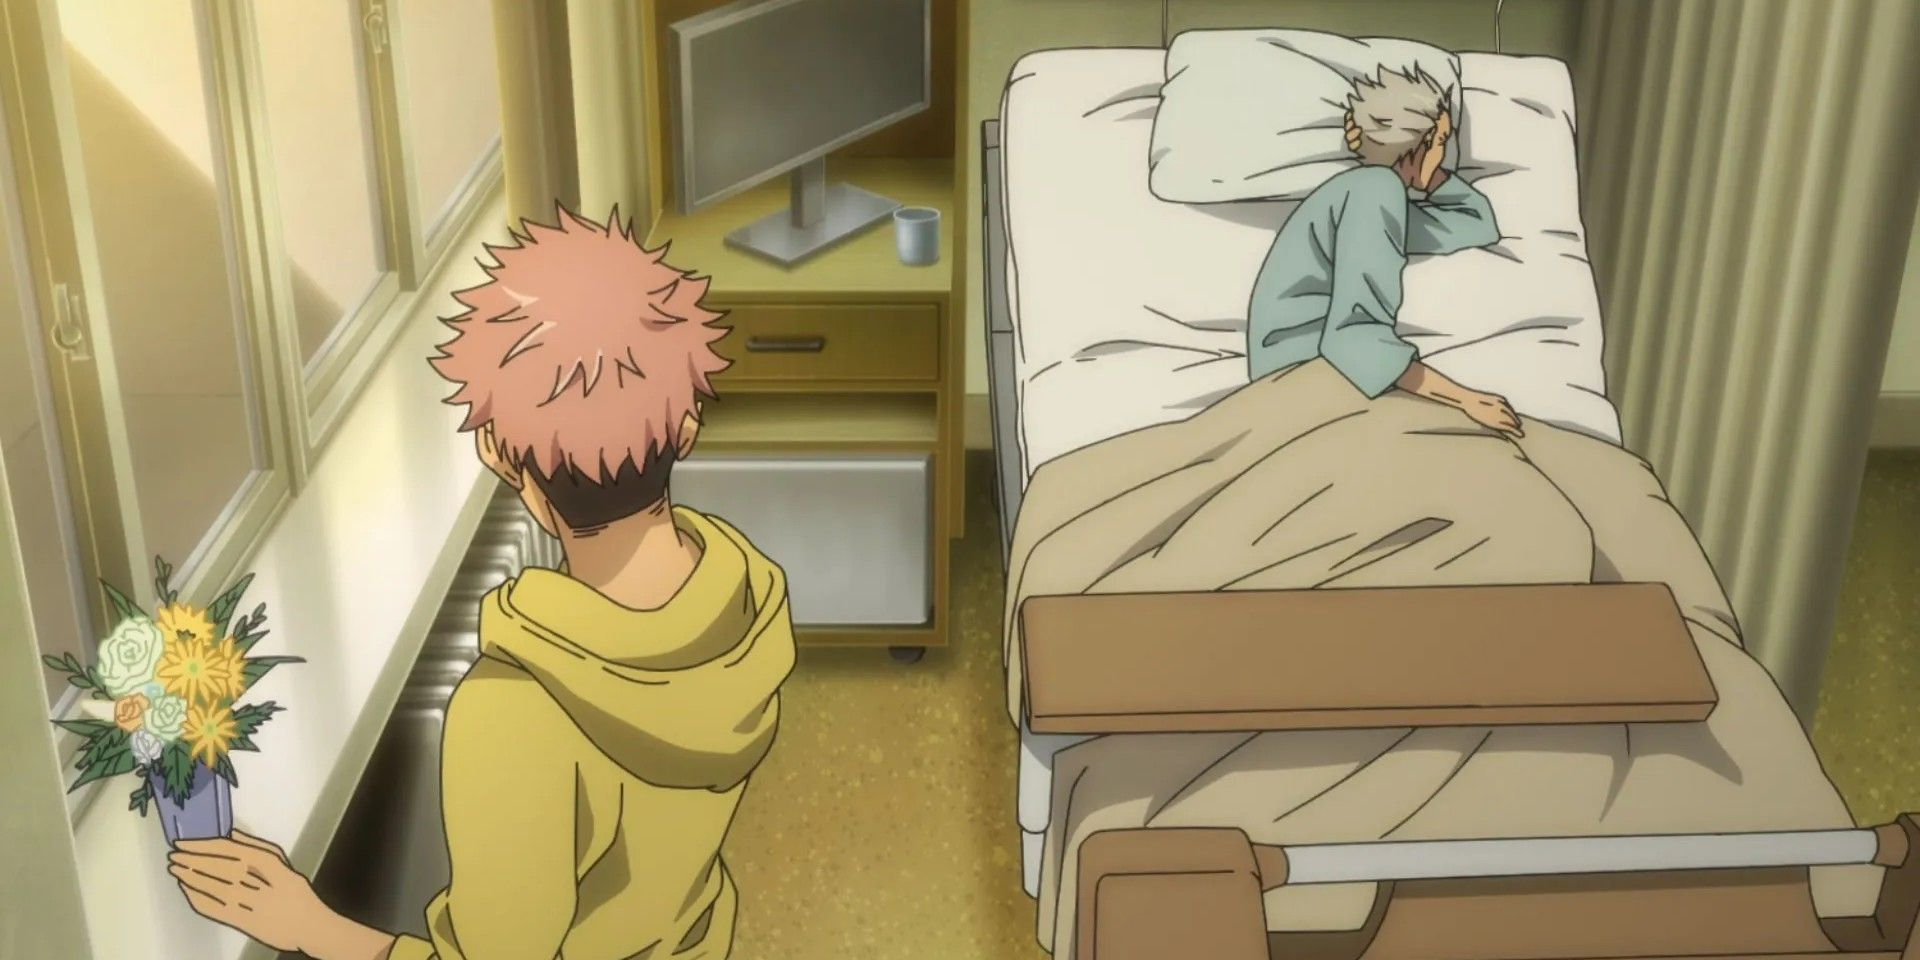 Yuji in the hospital with his grandfather in Jujutsu Kaisen.